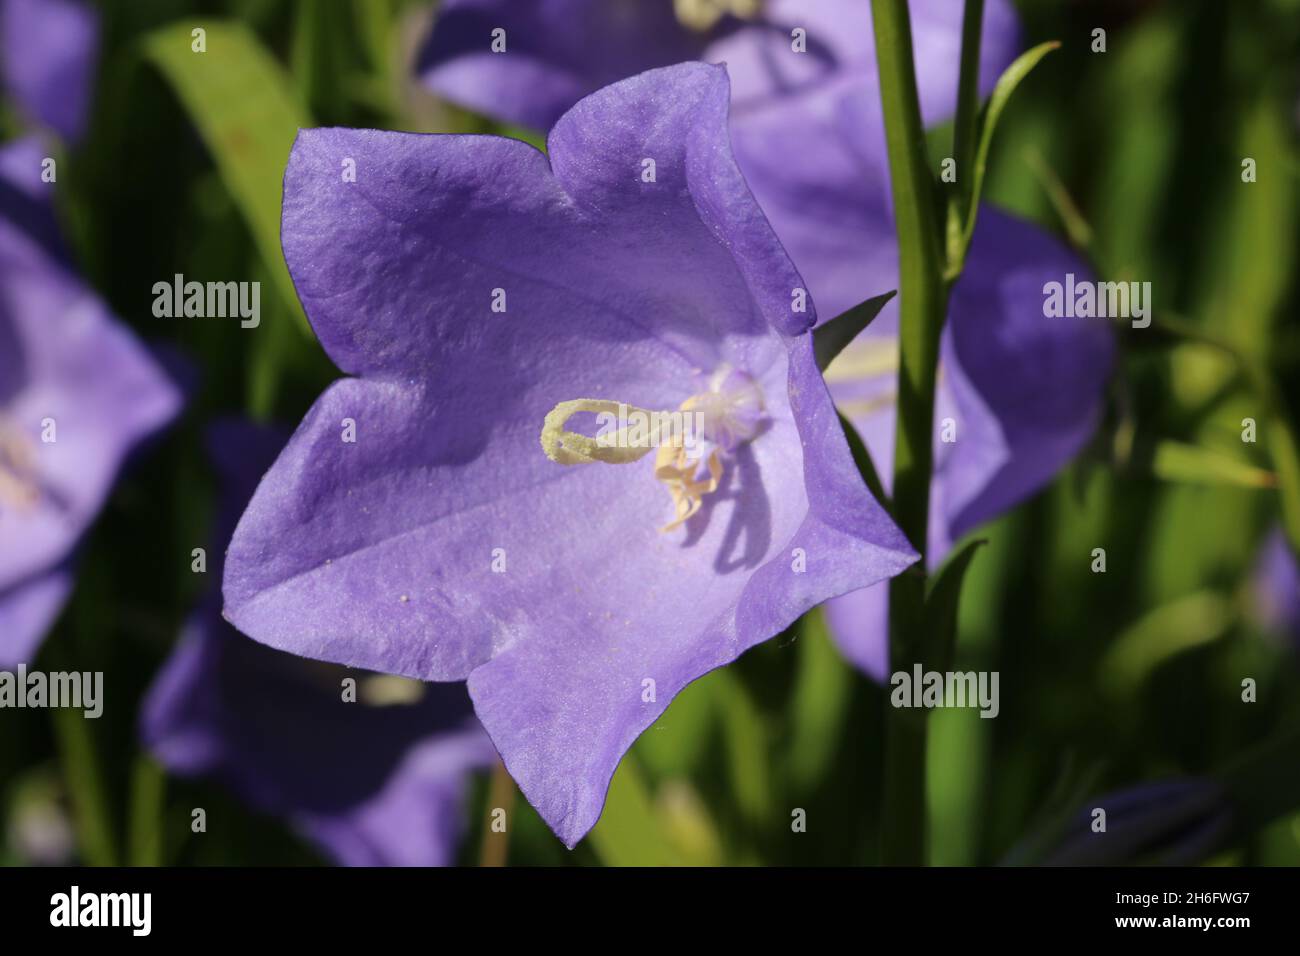 Blue canterbury bell, Campanula medium of unknown variety, flowers in close up with a blurred background of leaves and flowers. Stock Photo